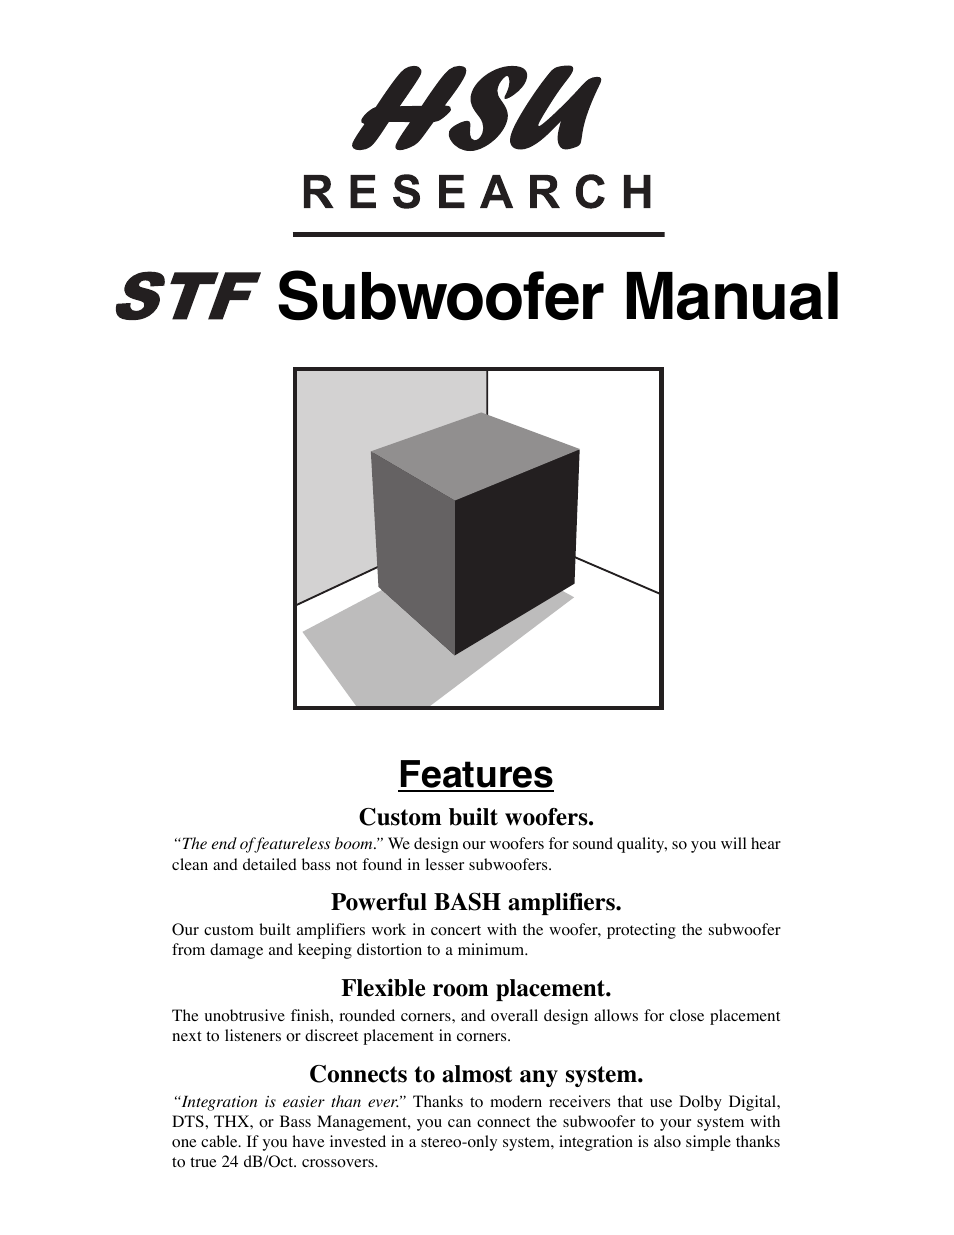 Subwoofer STF